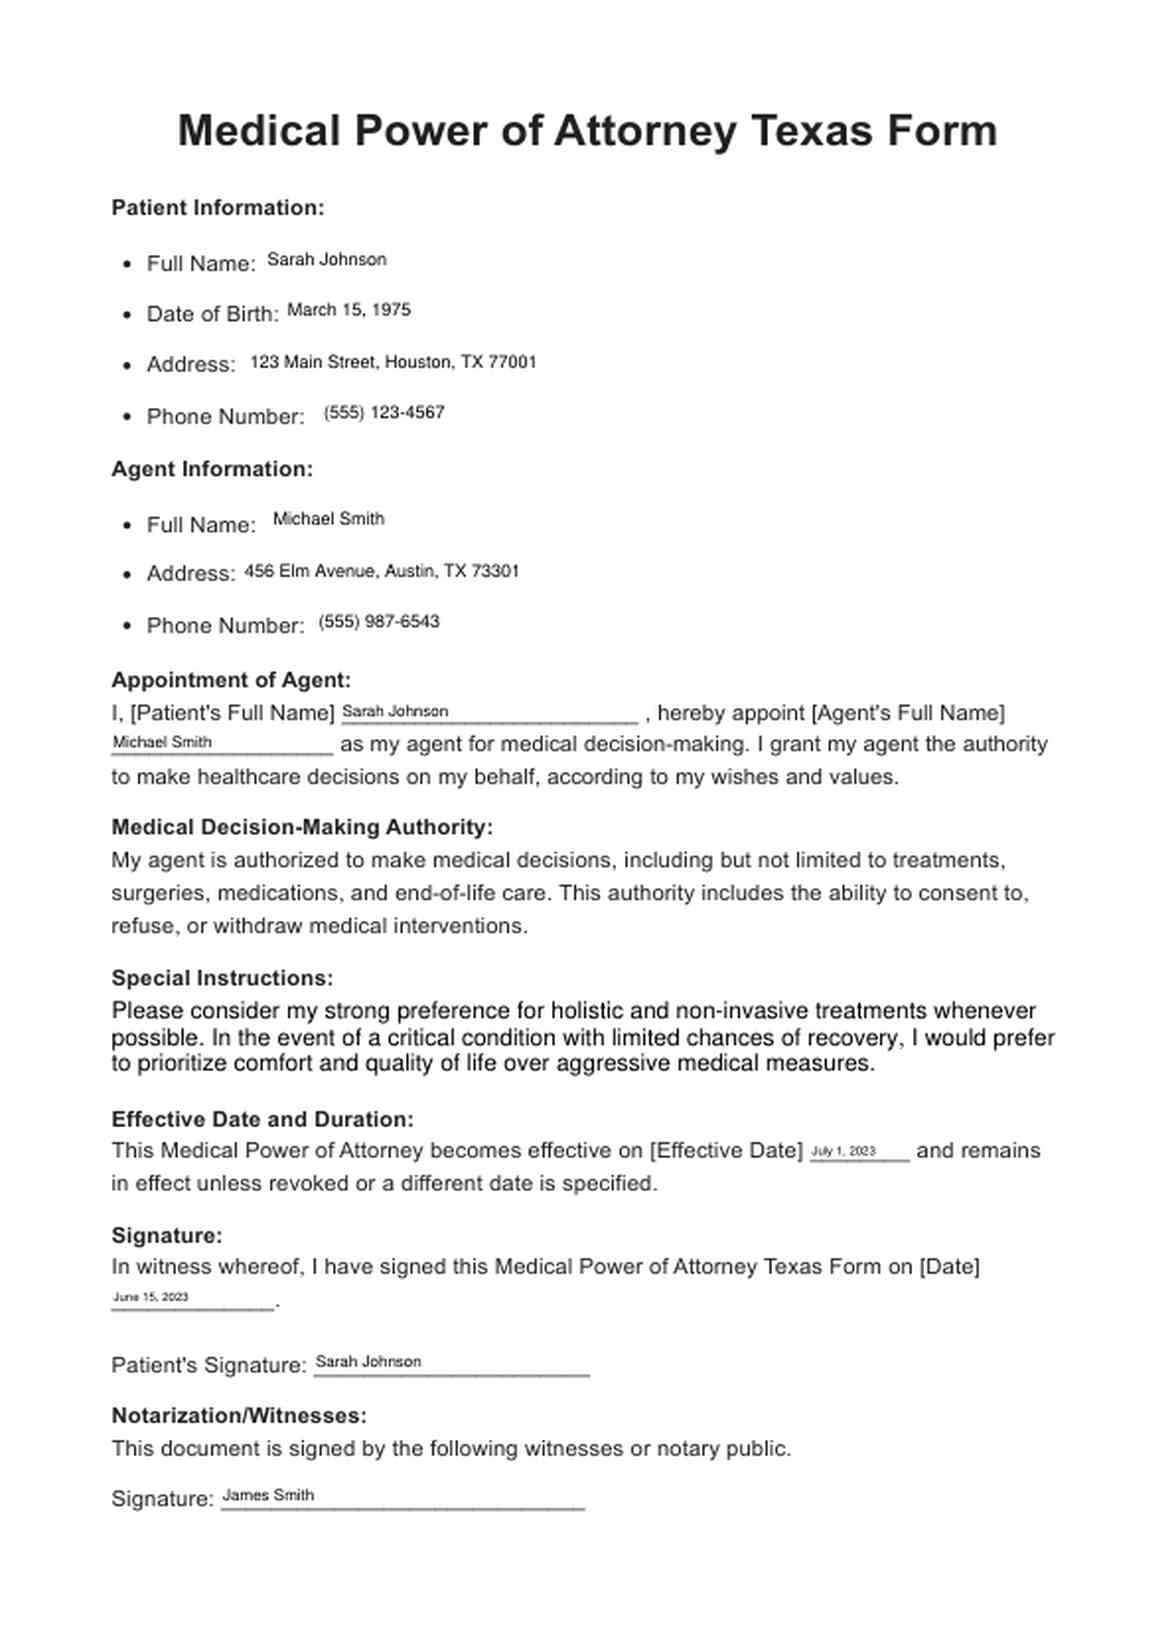 Medical Power Of Attorney Texas Form PDF Example